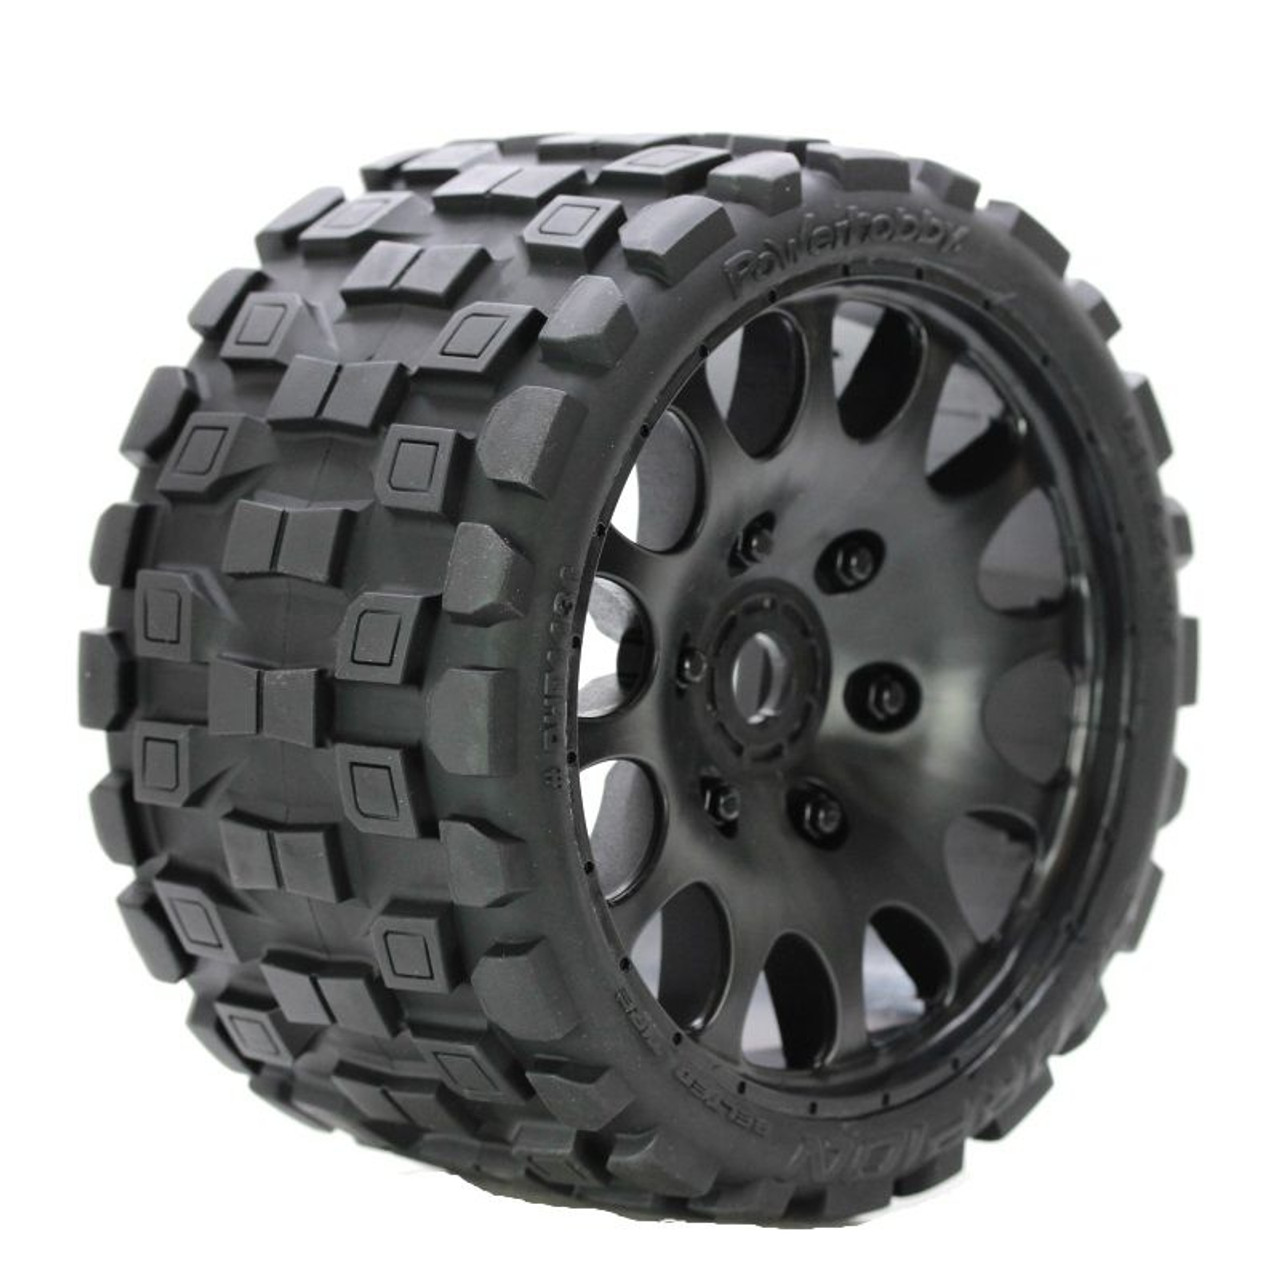 Power Hobby 1131R Scorpion Belted Monster Truck Wheels/Tires (pr.), Pre-mounted, Race Soft Compound 17mm Hex